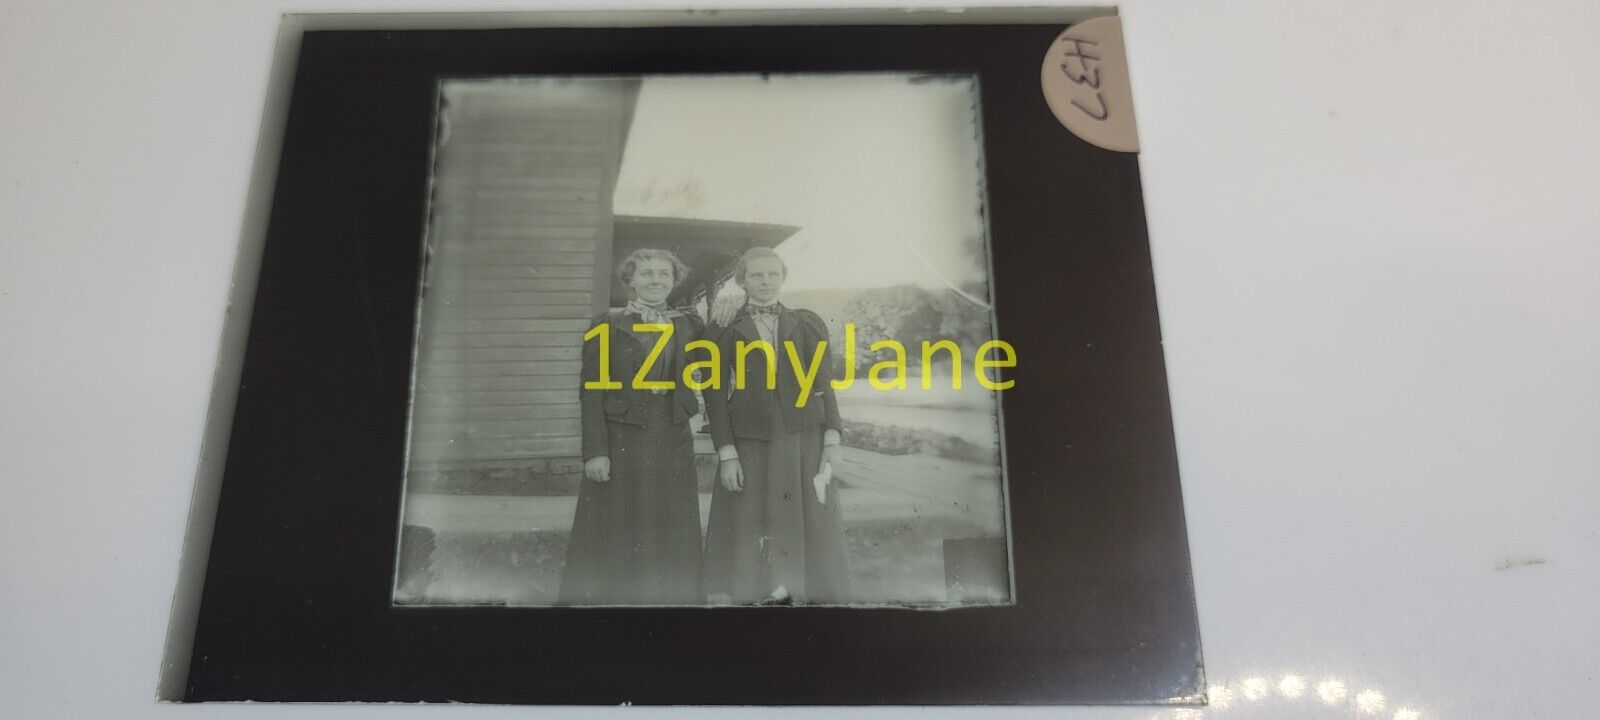 H37 GLASS Slide or Negative  SUITS AND TIES AROUND NECK